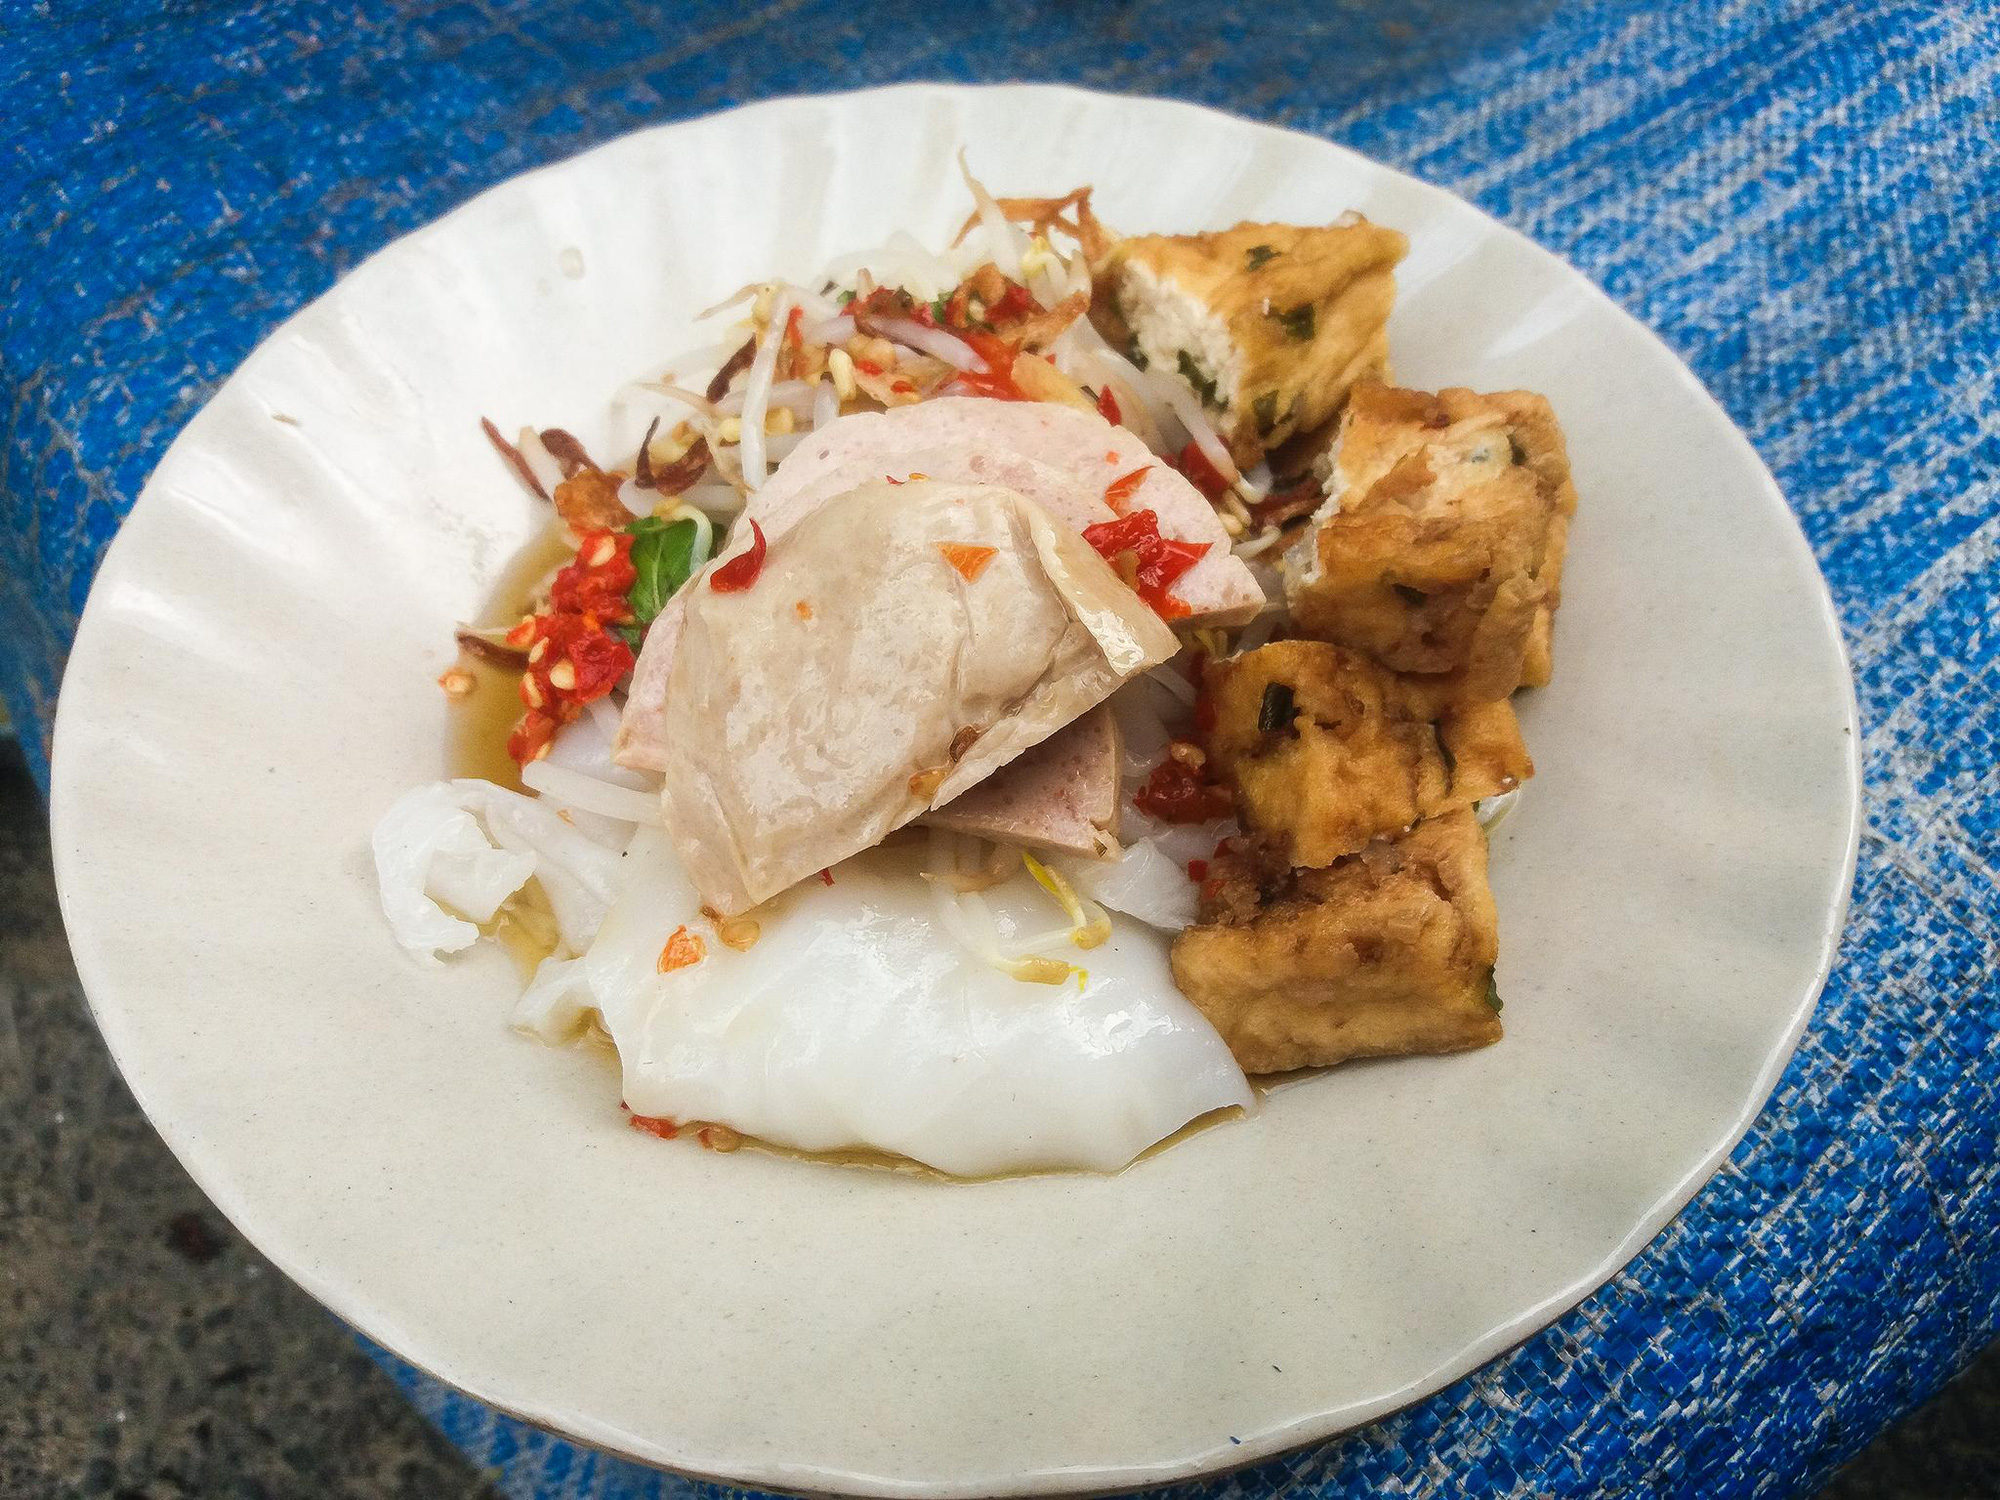 Check out this 50-year-old banh uot stall in Ho Chi Minh City